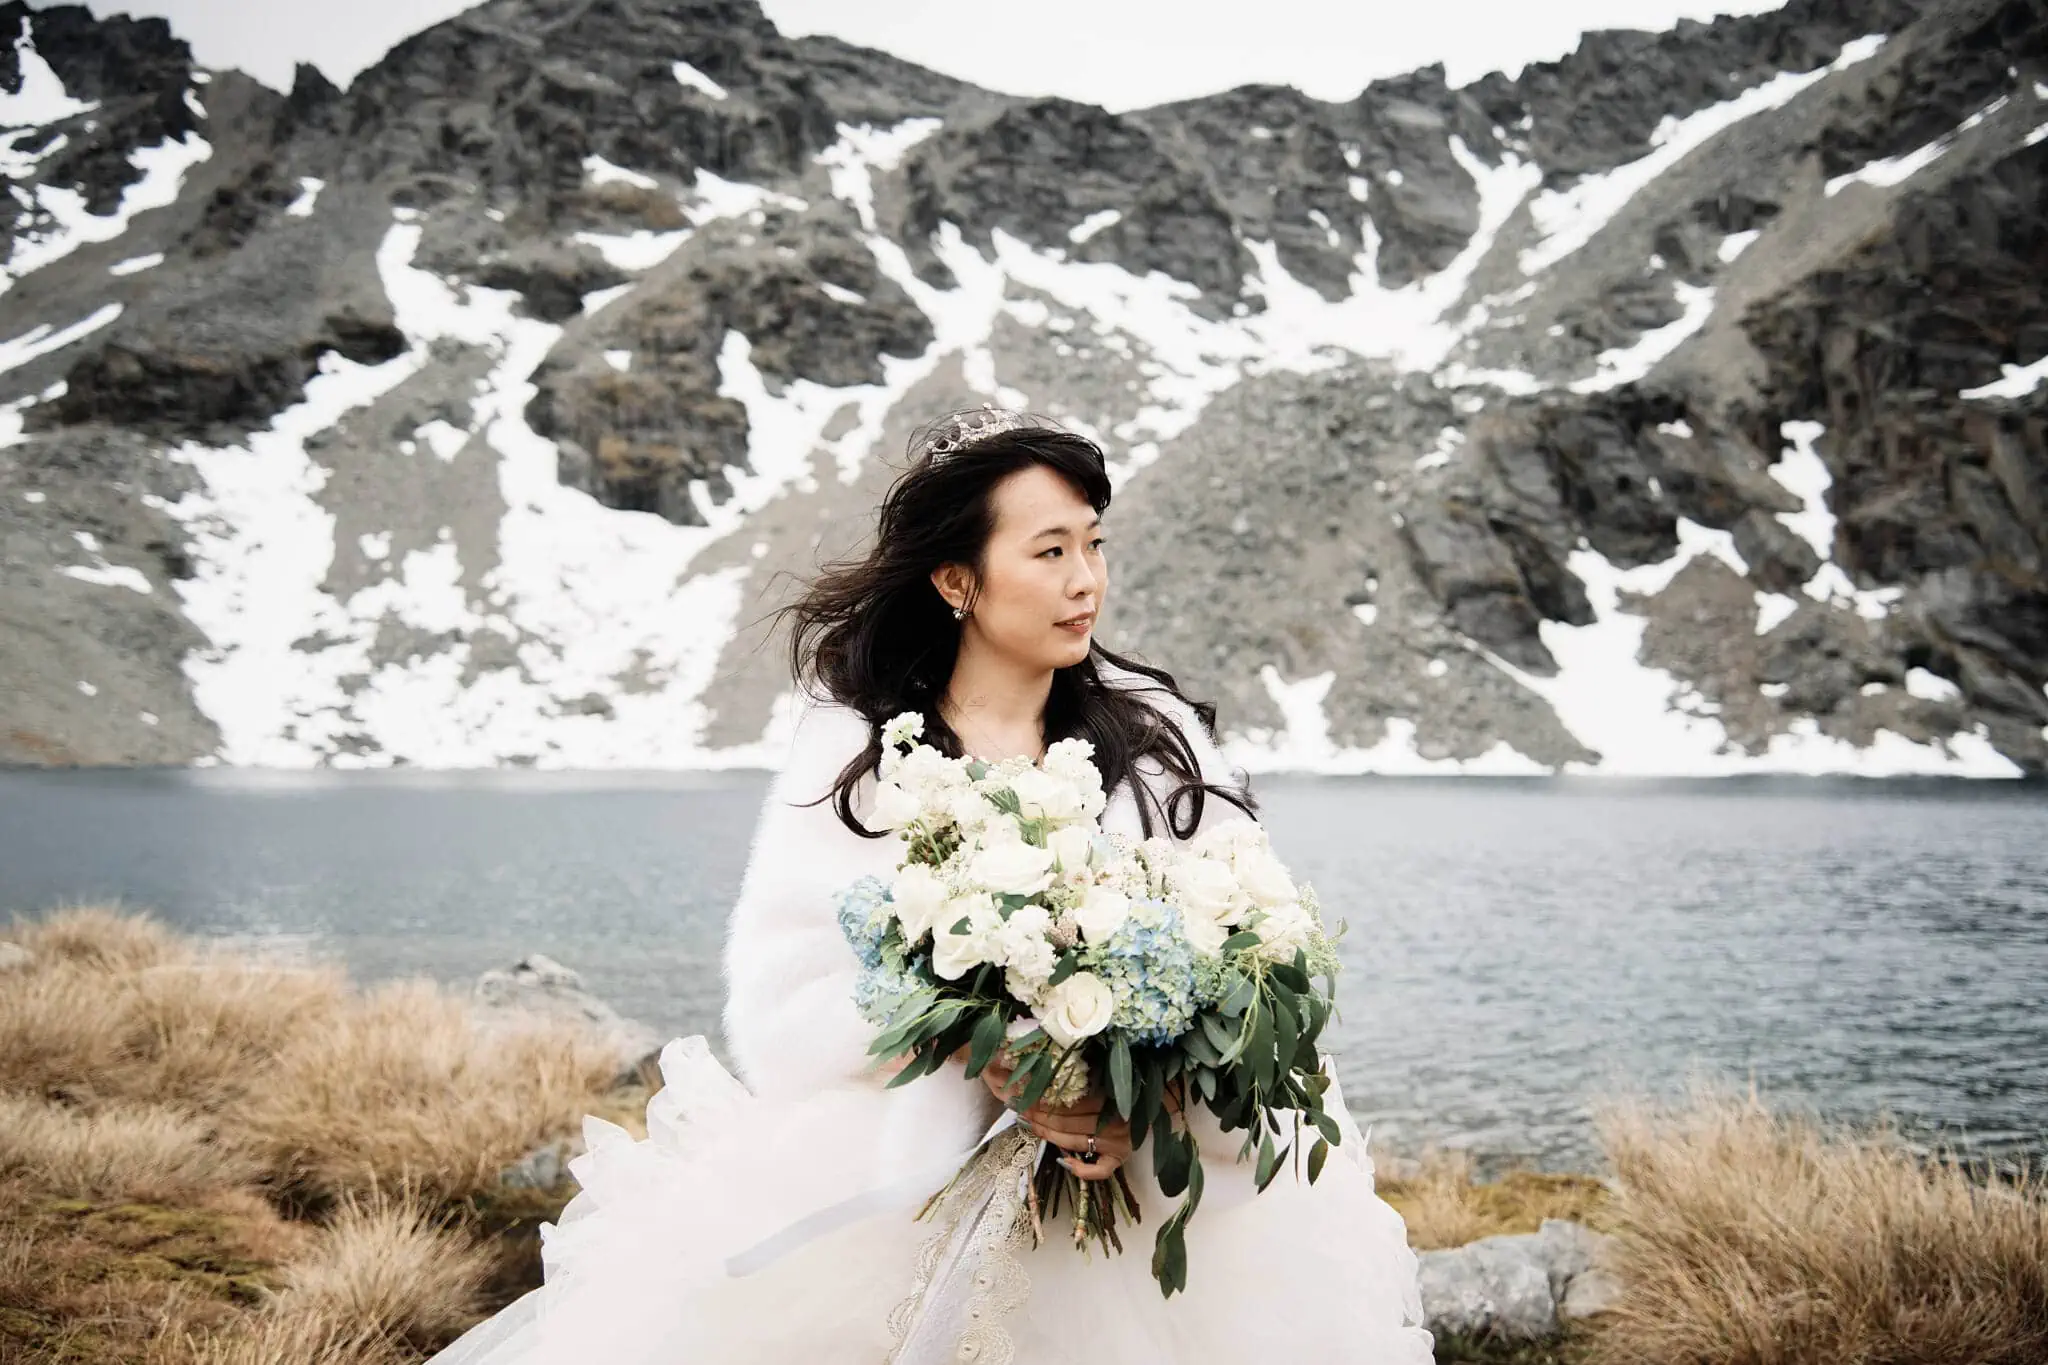 Carlos and Wanzhu's intimate elopement wedding at Cecil Peak with a bride holding a bouquet in front of a lake.